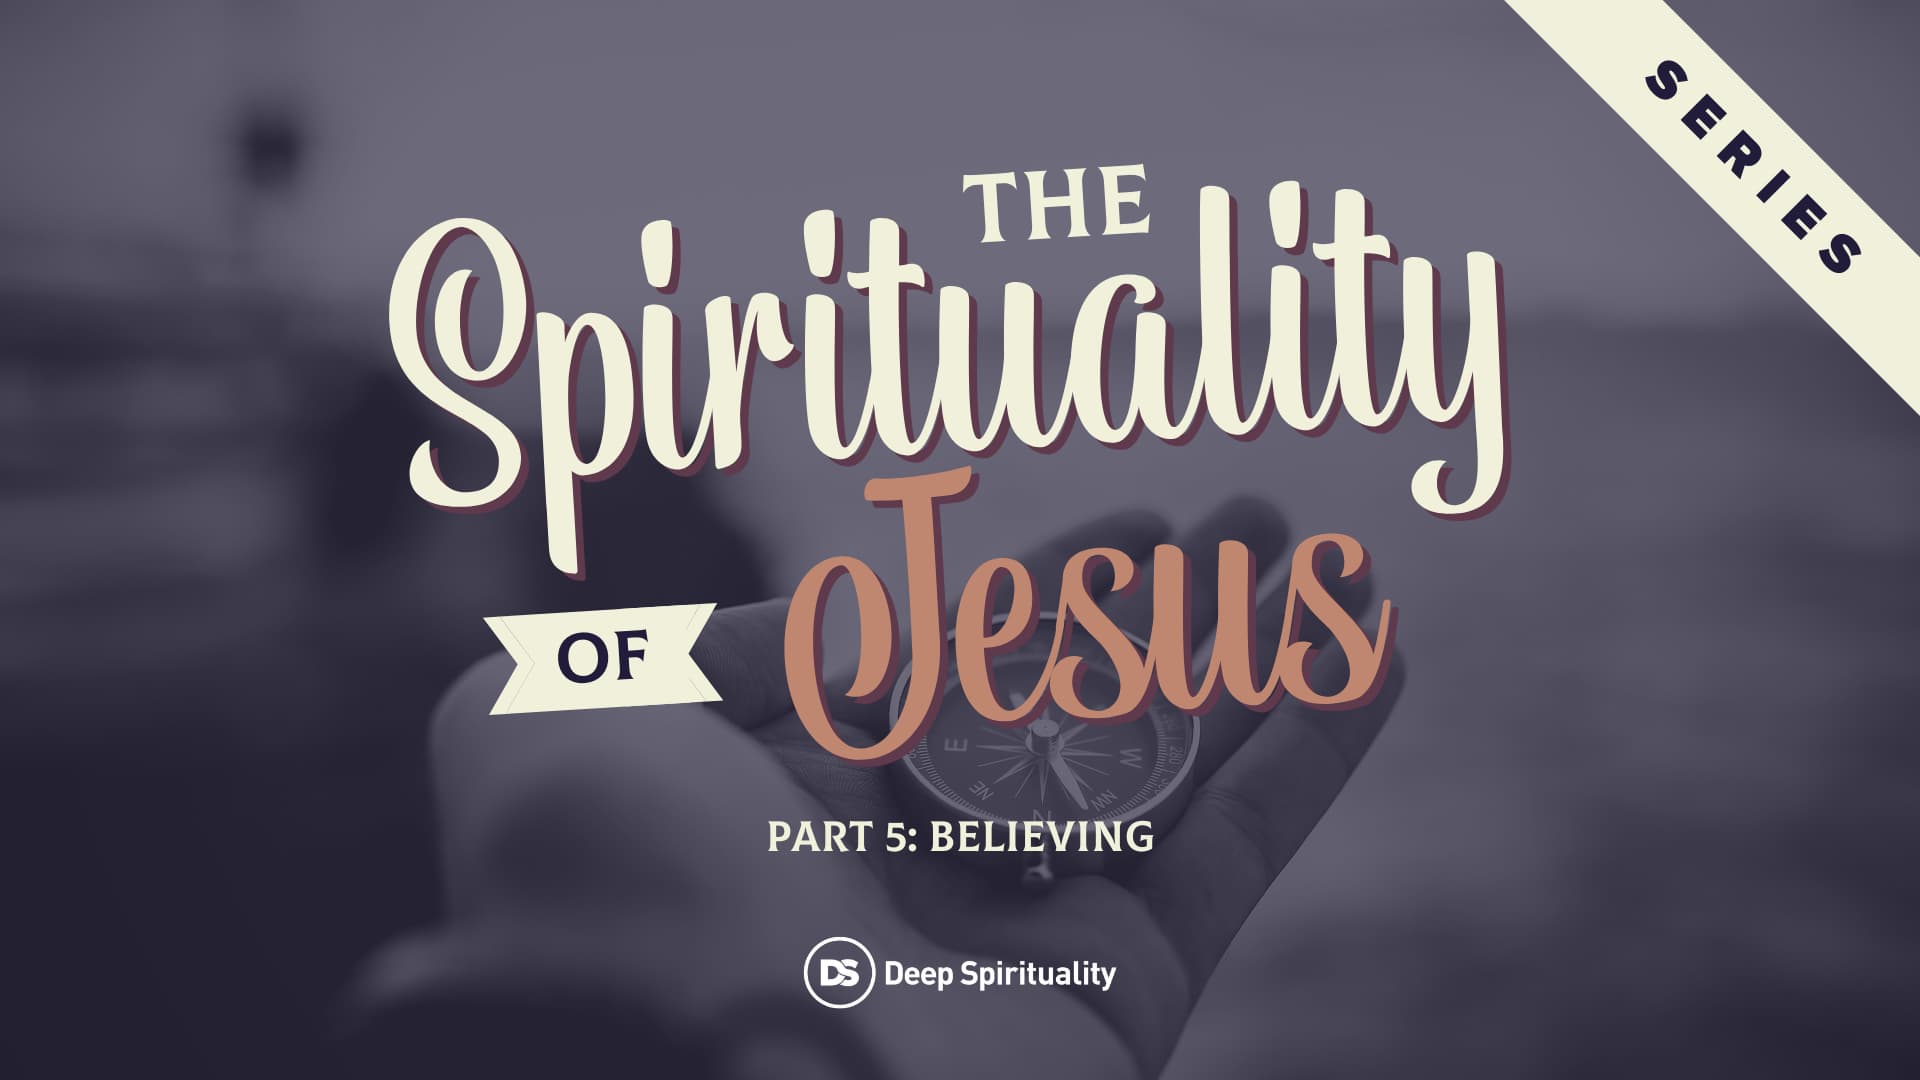 The Spirituality of Jesus, Part 5: Believing 5